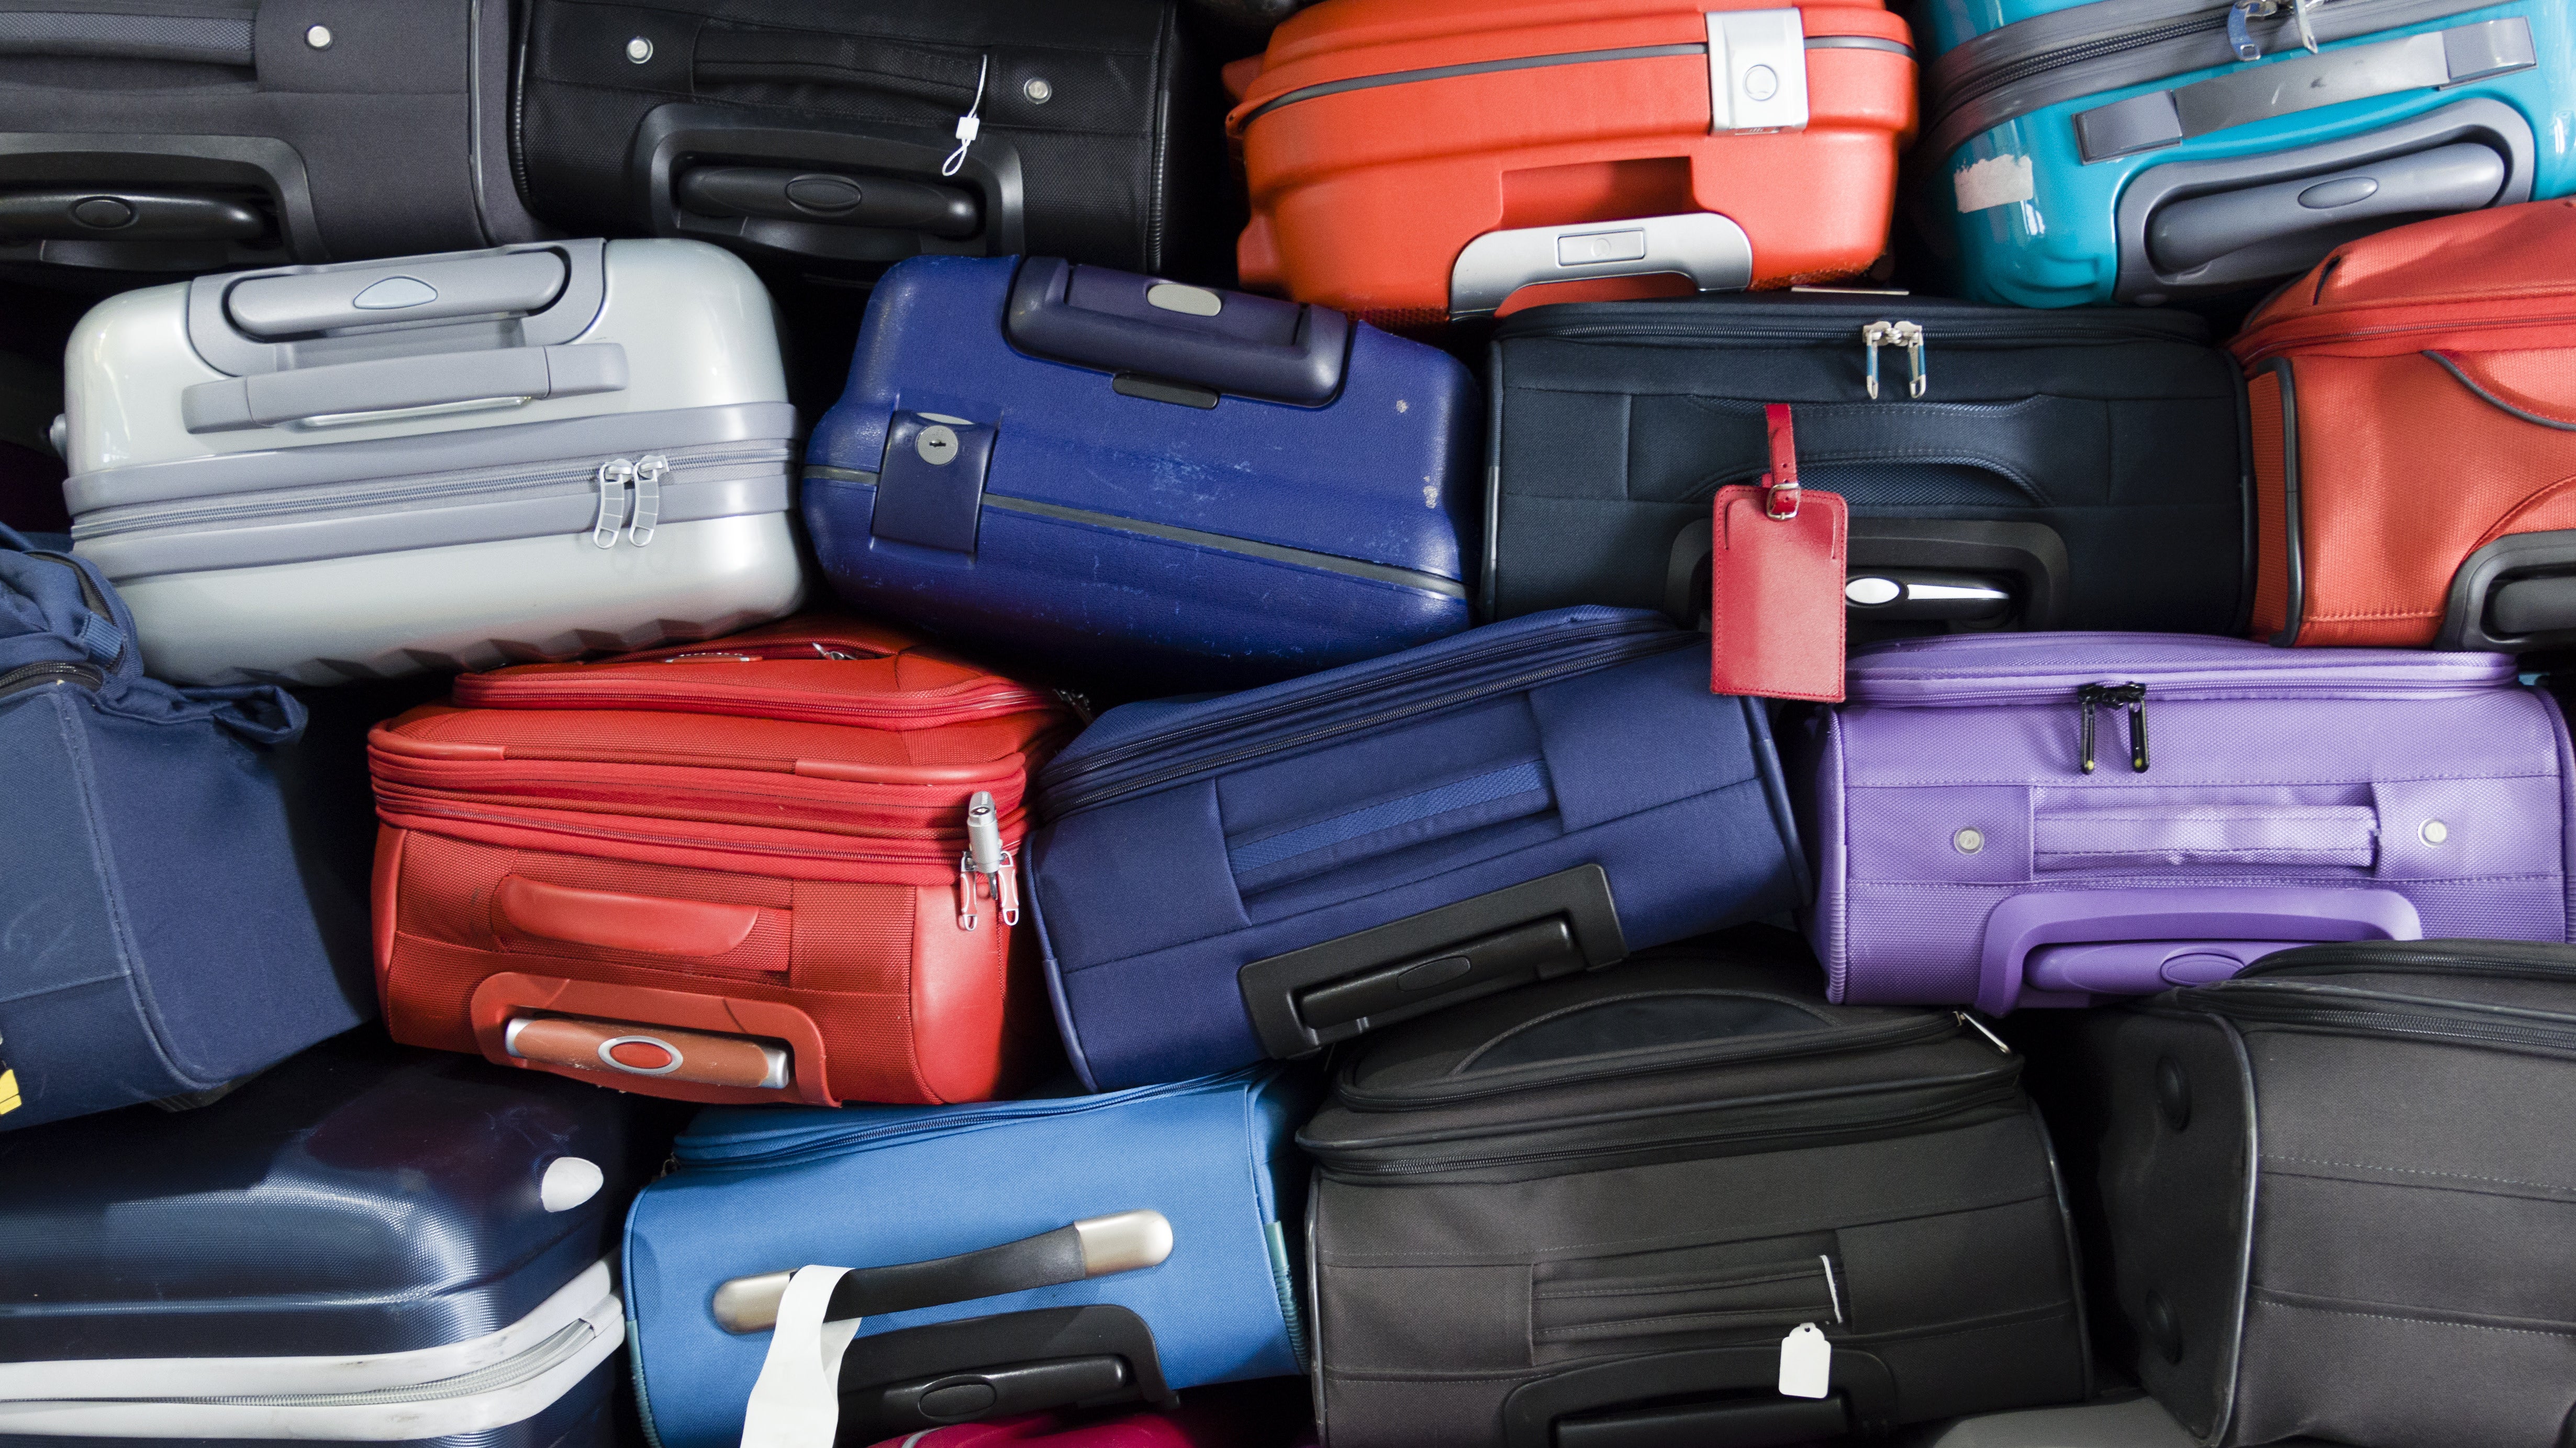 How To Help Your Luggage Stand Out